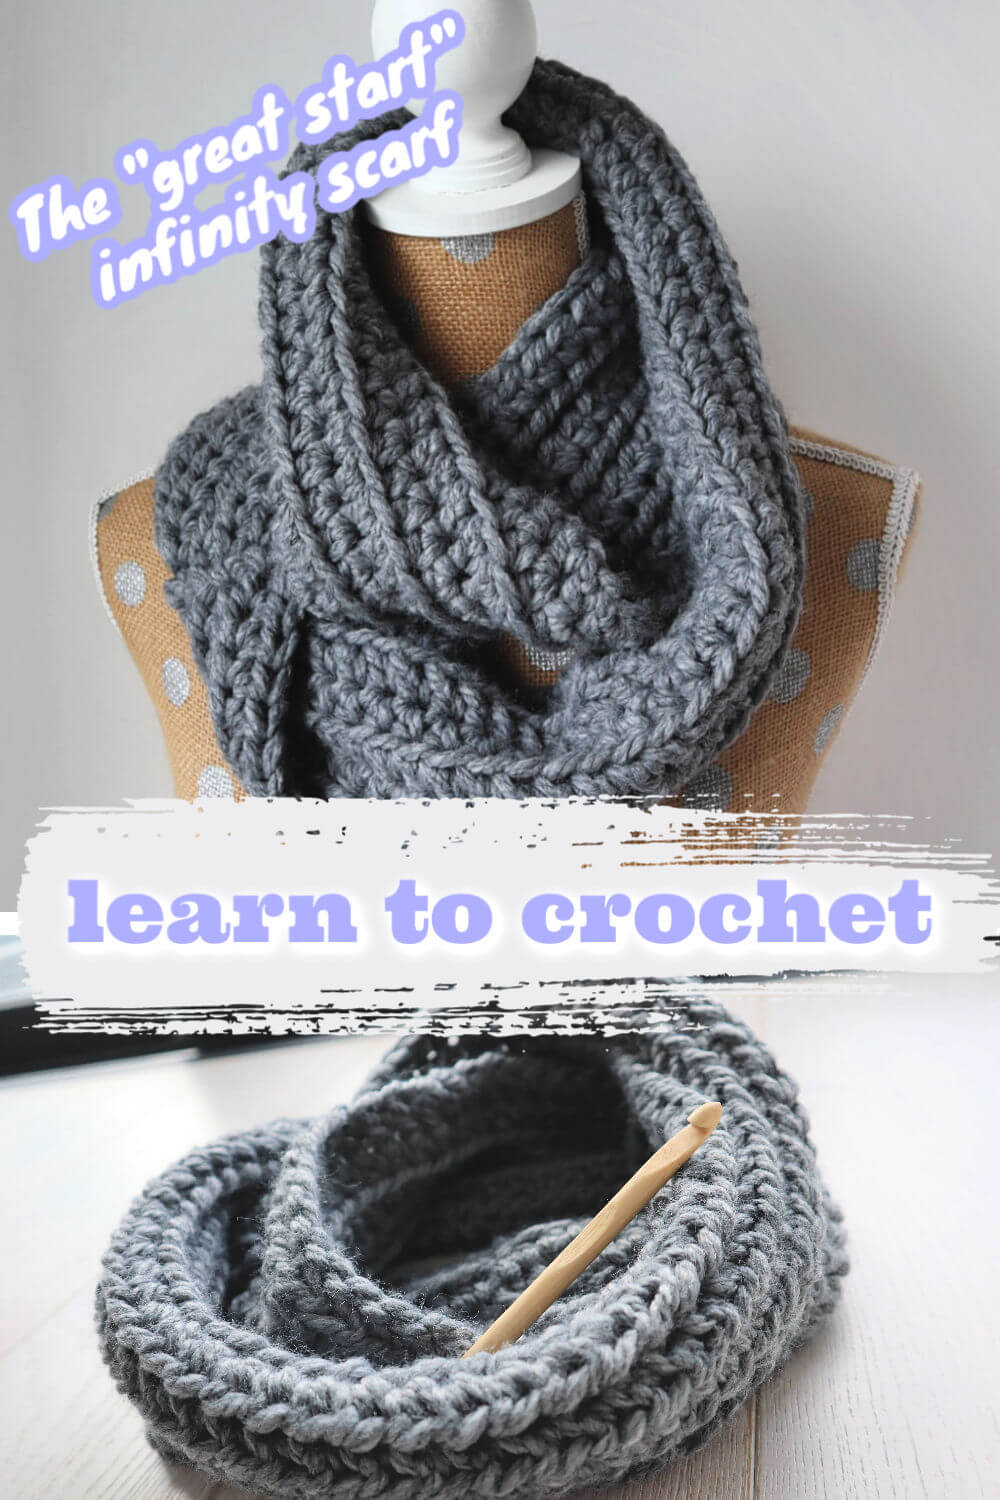 learn to crochet a scarf